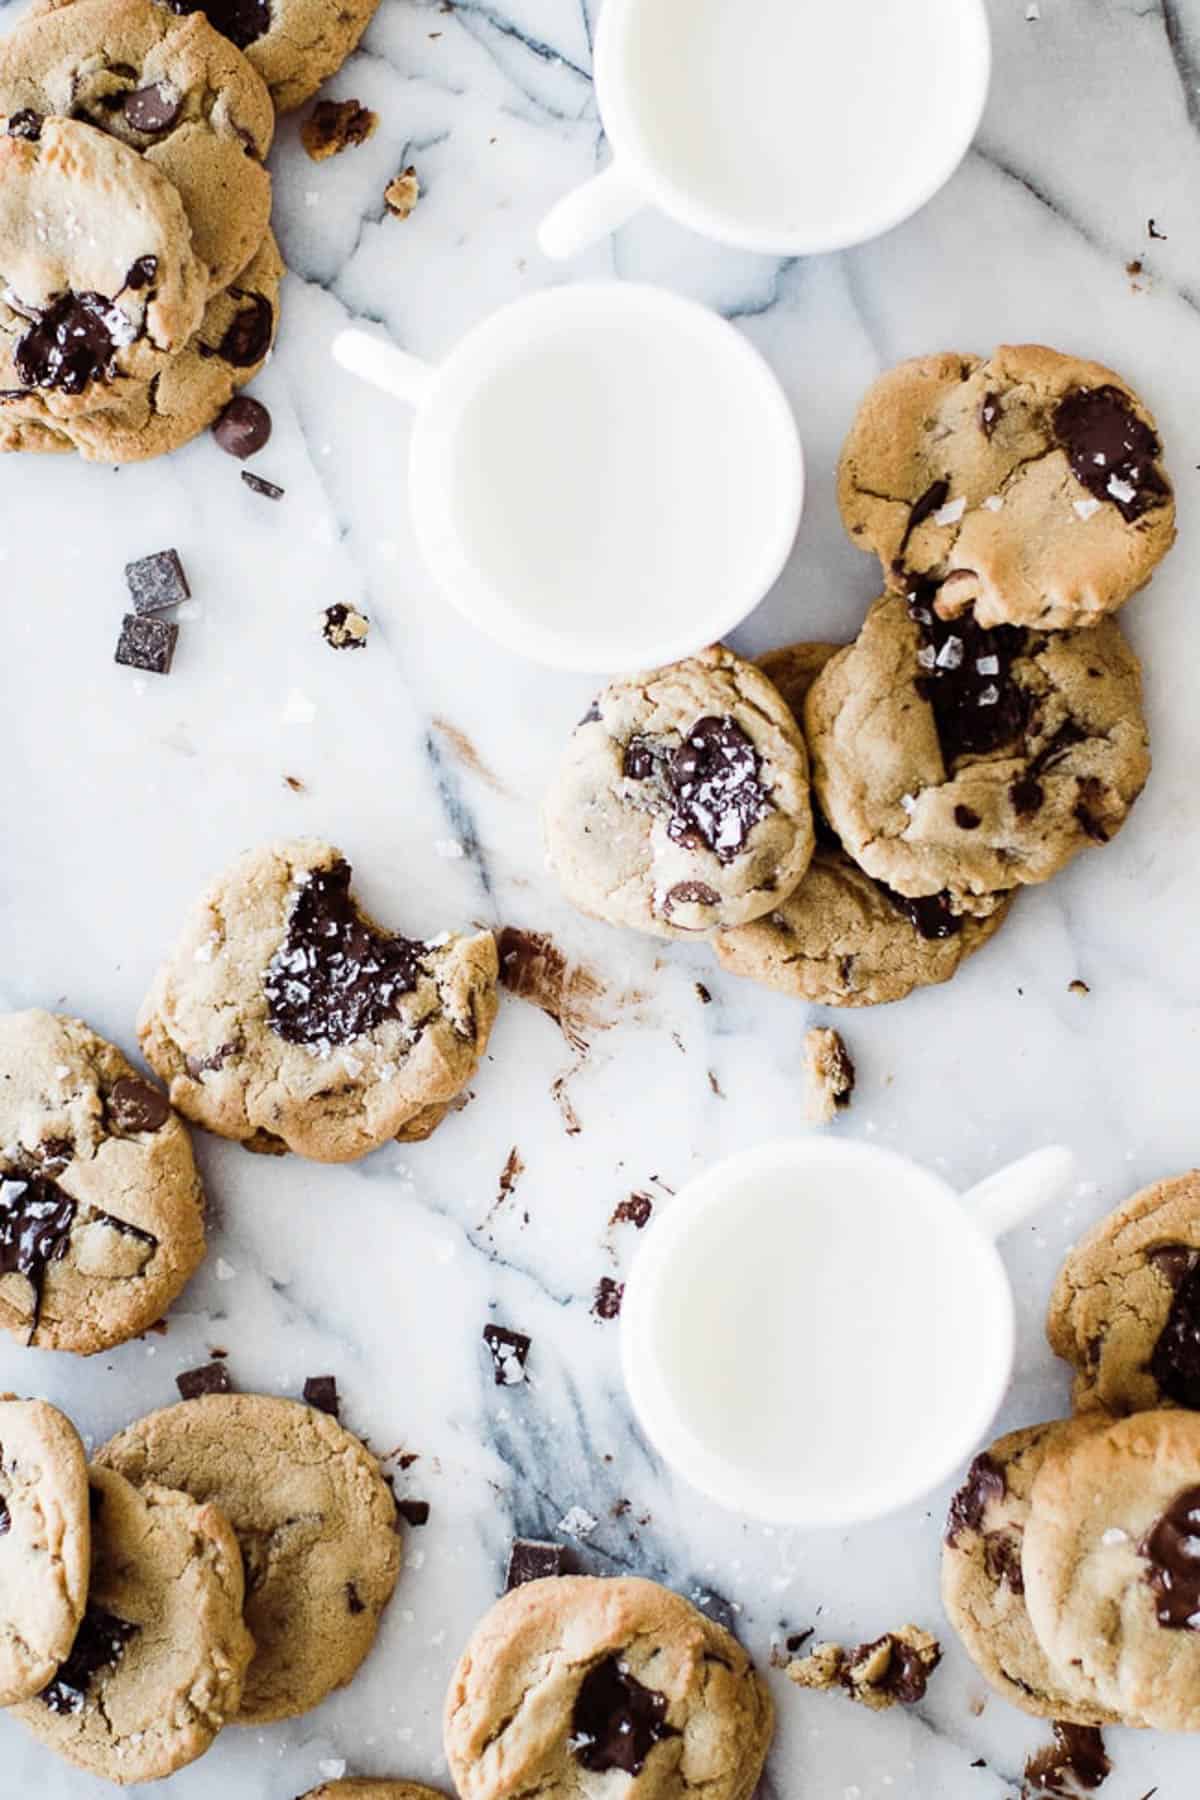 mugs of milk and chocolate chip cookies on marble board